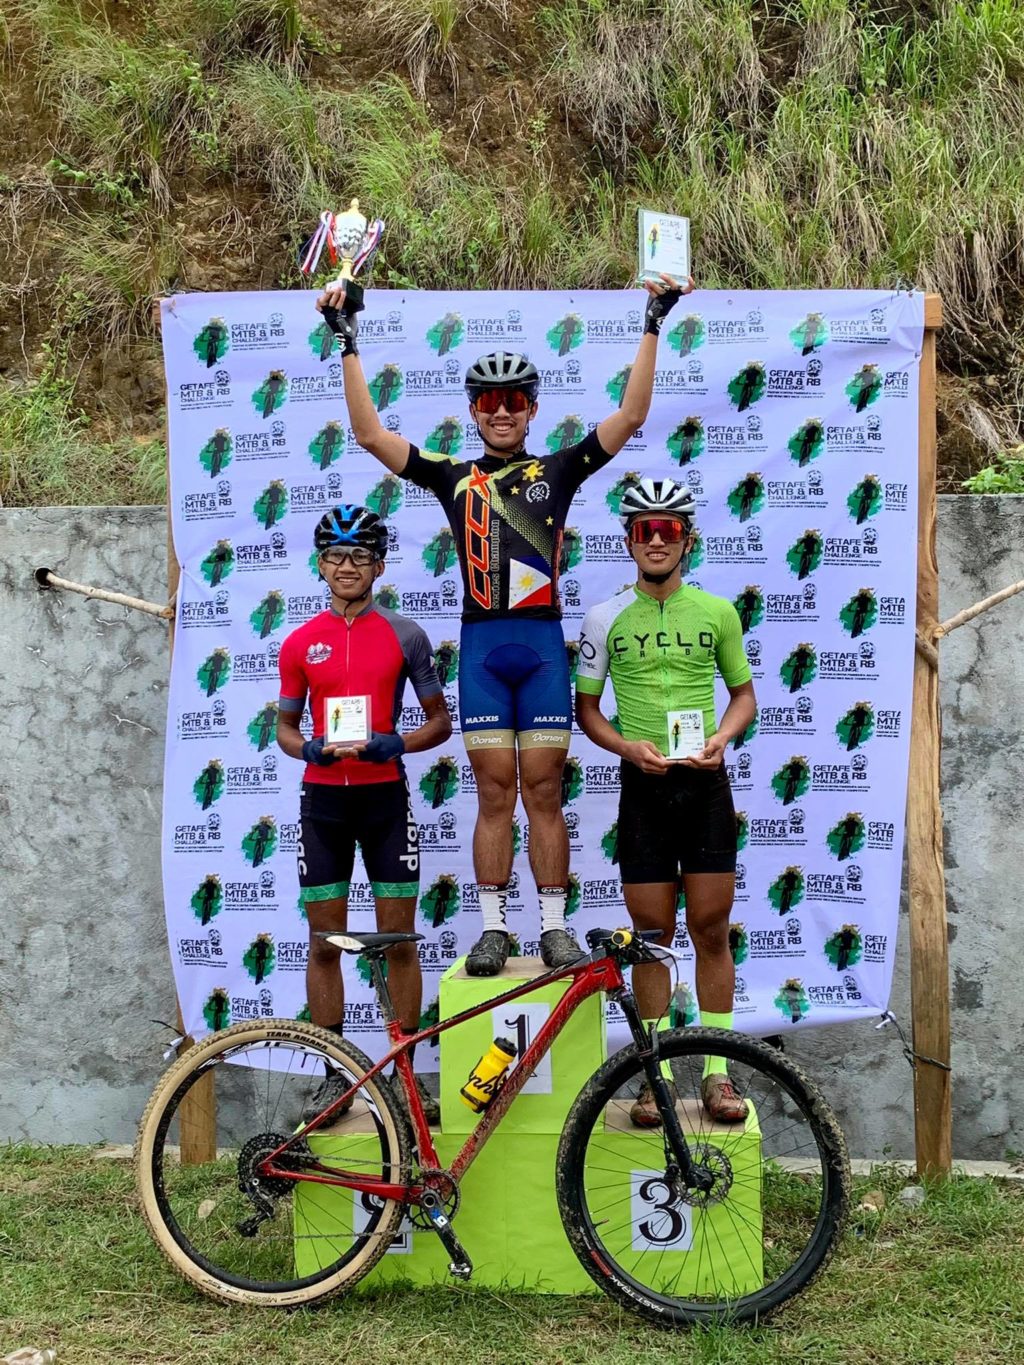 Khalil Sanchez is on the top of the podium after winning the U-17 category of the Getafe MTB and Road Bike Challenge on Sunday, Oct. 10. | Photo from Khalil Sanchez